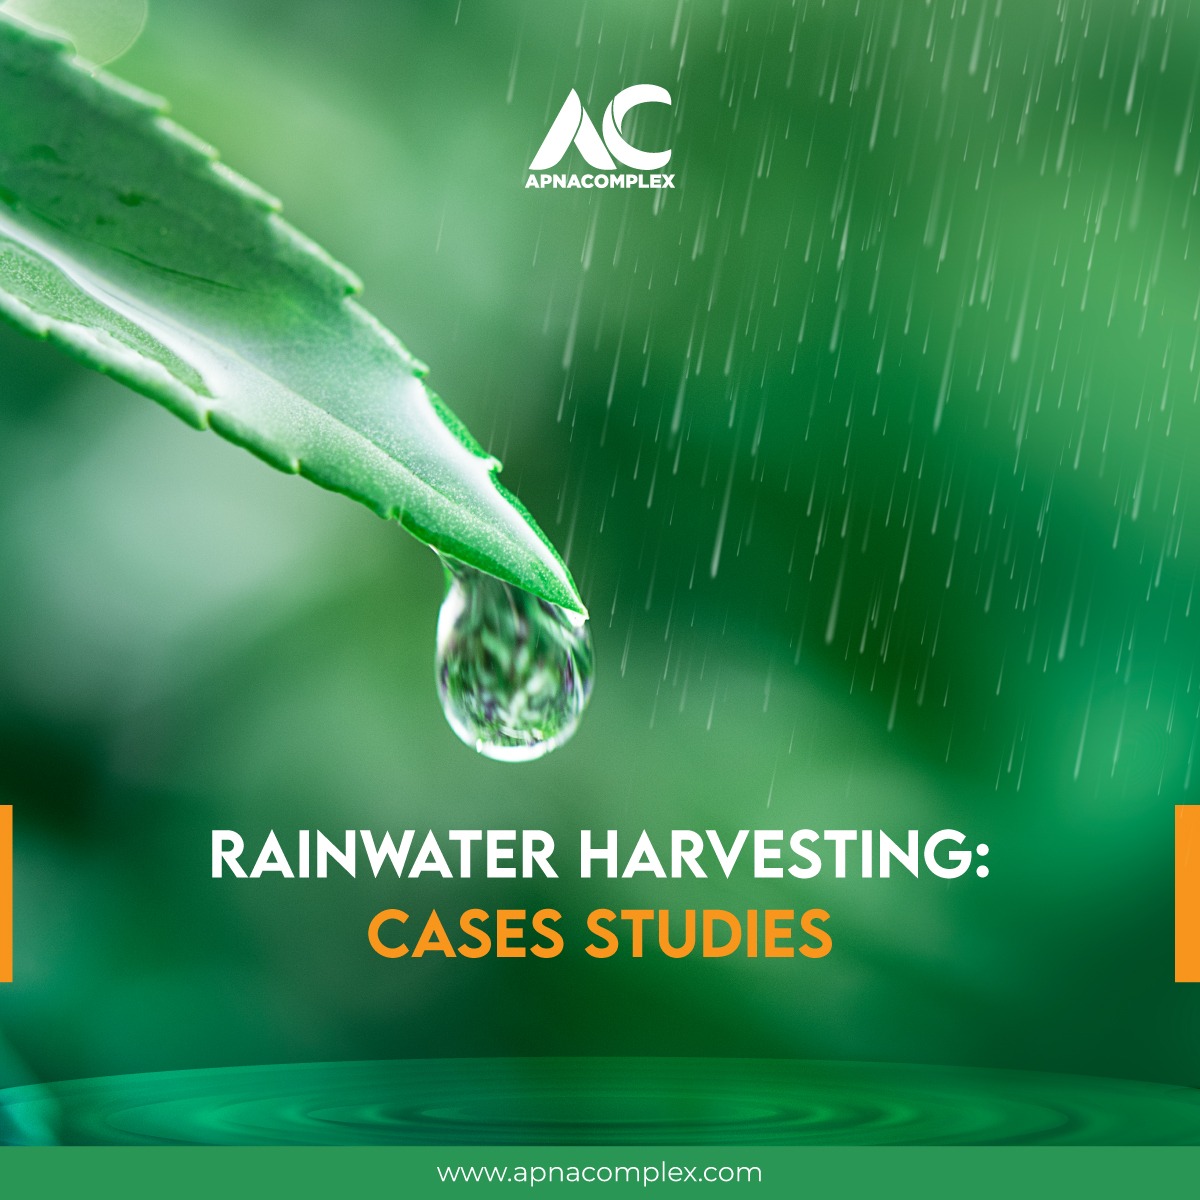 Picture of leaf with dewdrop and text saying "Rainwater Harvesting: Cases Studies"